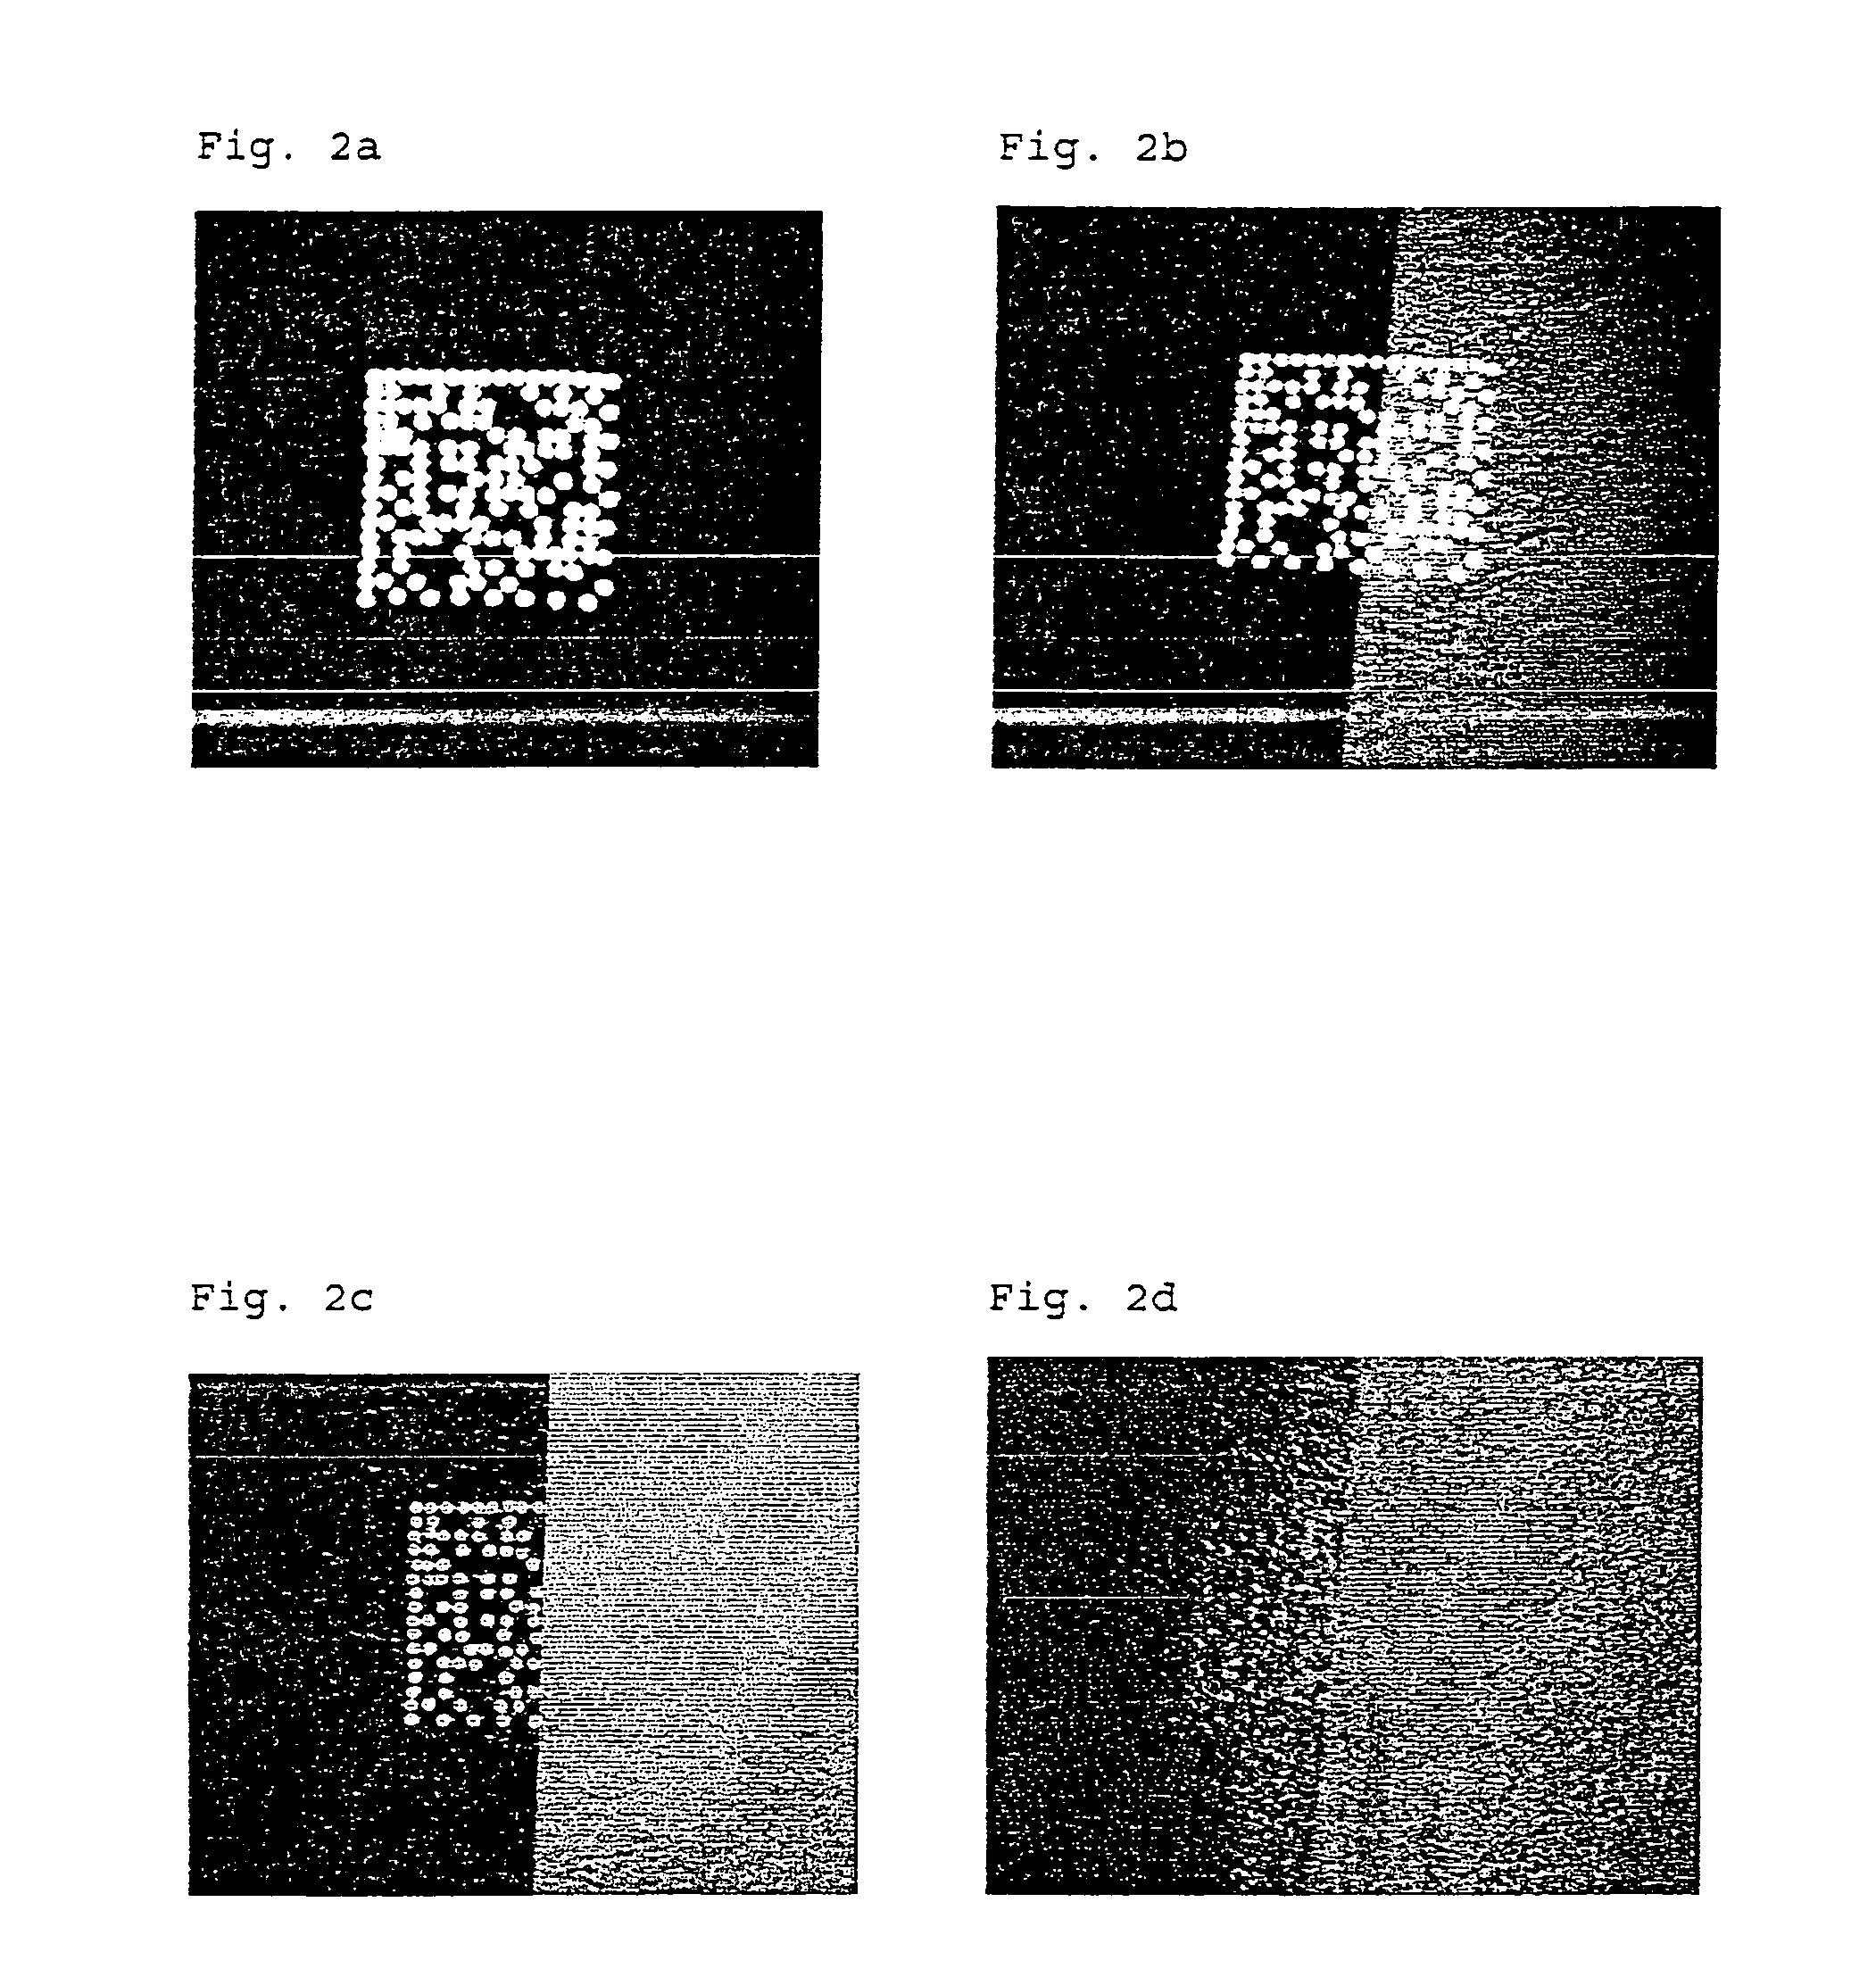 Identification and authentication using liquid crystal material markings